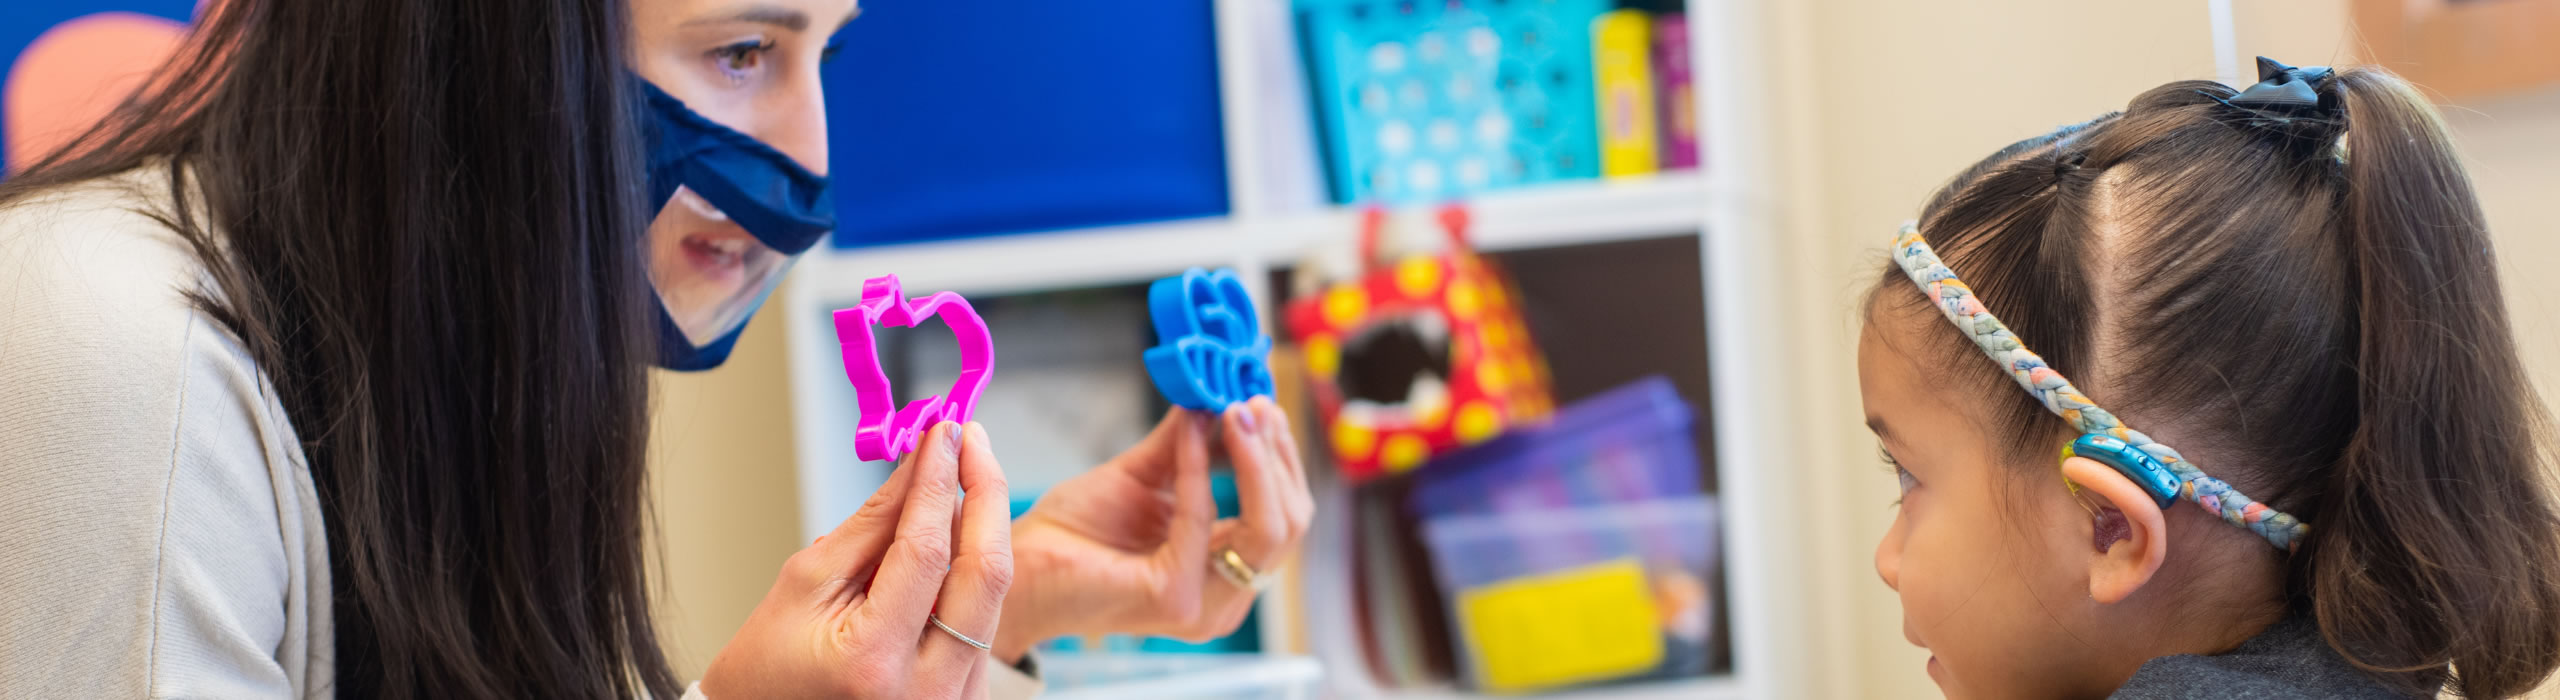 Speech language pathologist working with young child to elicit language. Therapist is holding two objects- one pink and one blue – in each hand, and asking the child to choose one or the other, when prompted.